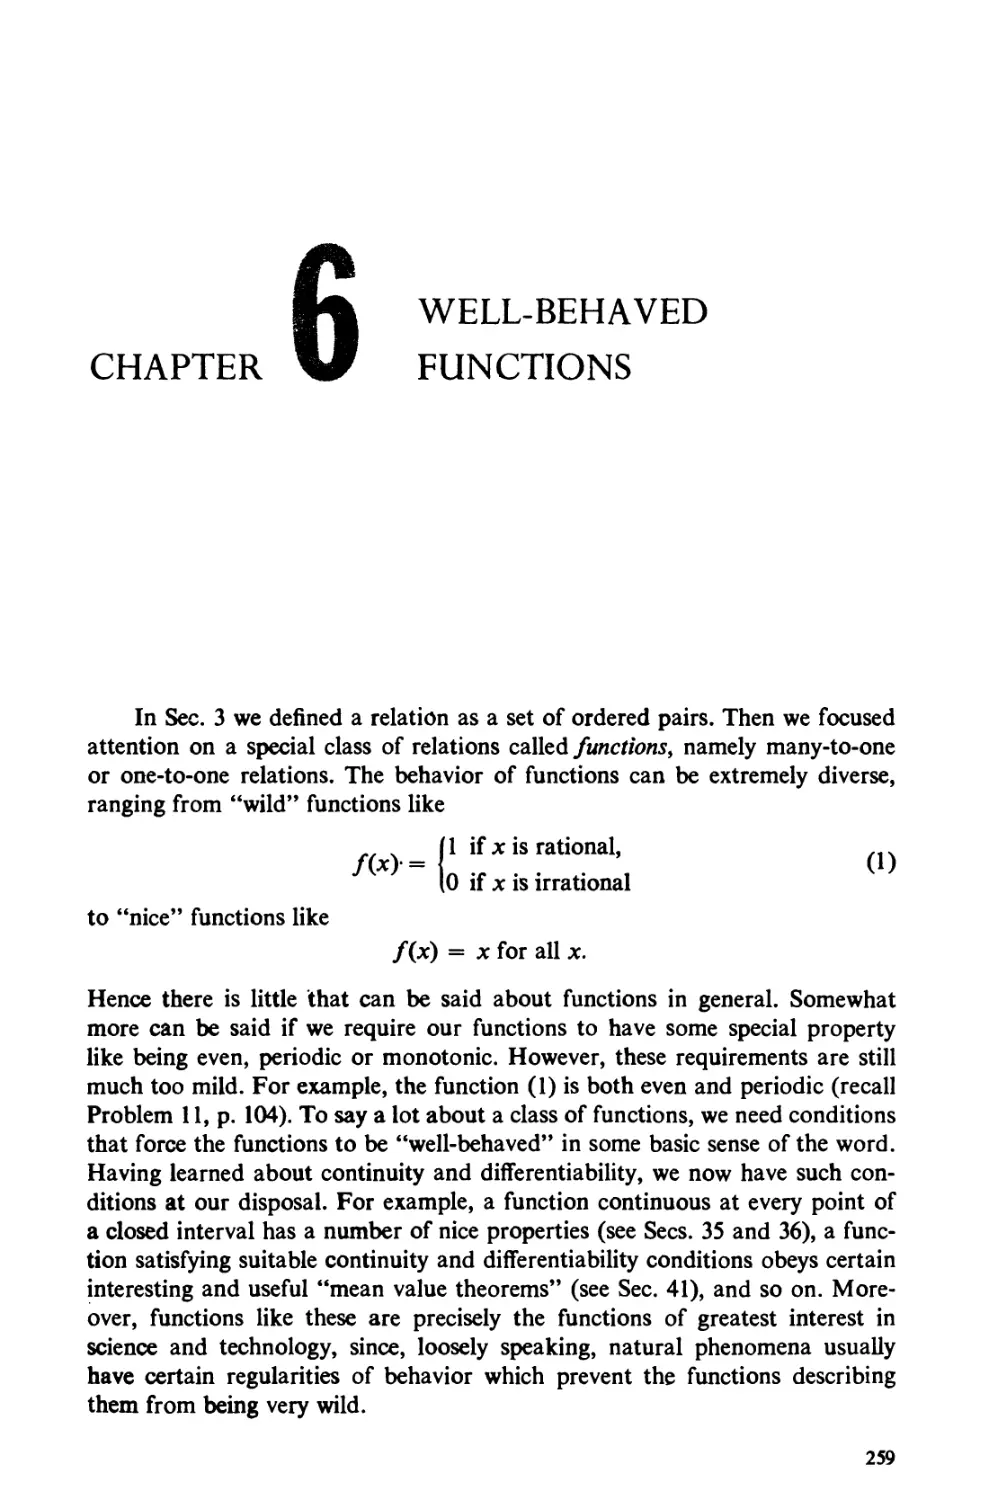 CHAPTER 6 WELL-BEHAVED FUNCTIONS